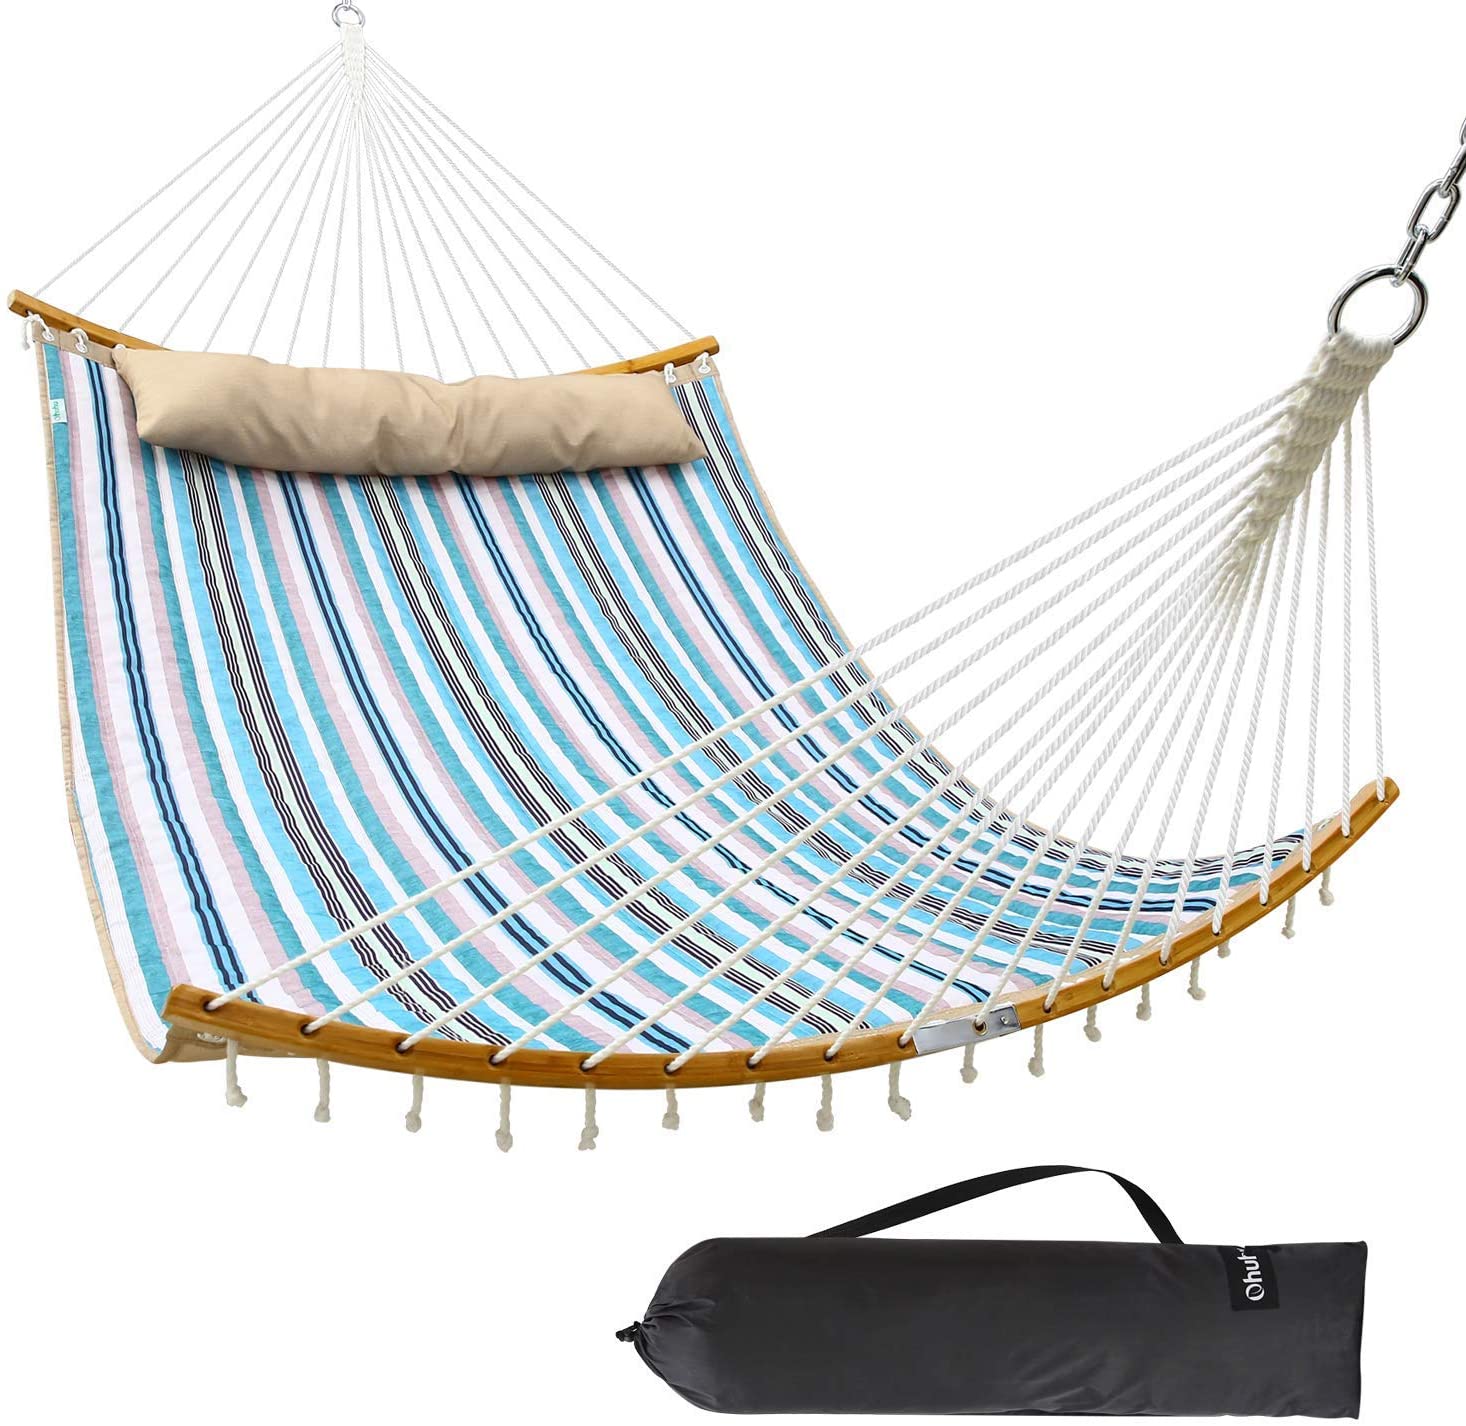 Beach etc 280X150CM Hiking Backpacking Patio HappyGo Cotton Hammocks with Spreader Bar 9ft Canvas Hammock with Tree Straps & Carabiners Heavy Capacity Up to 550lbs for Outdoor Camping Red, 280x150cm Red Backyard